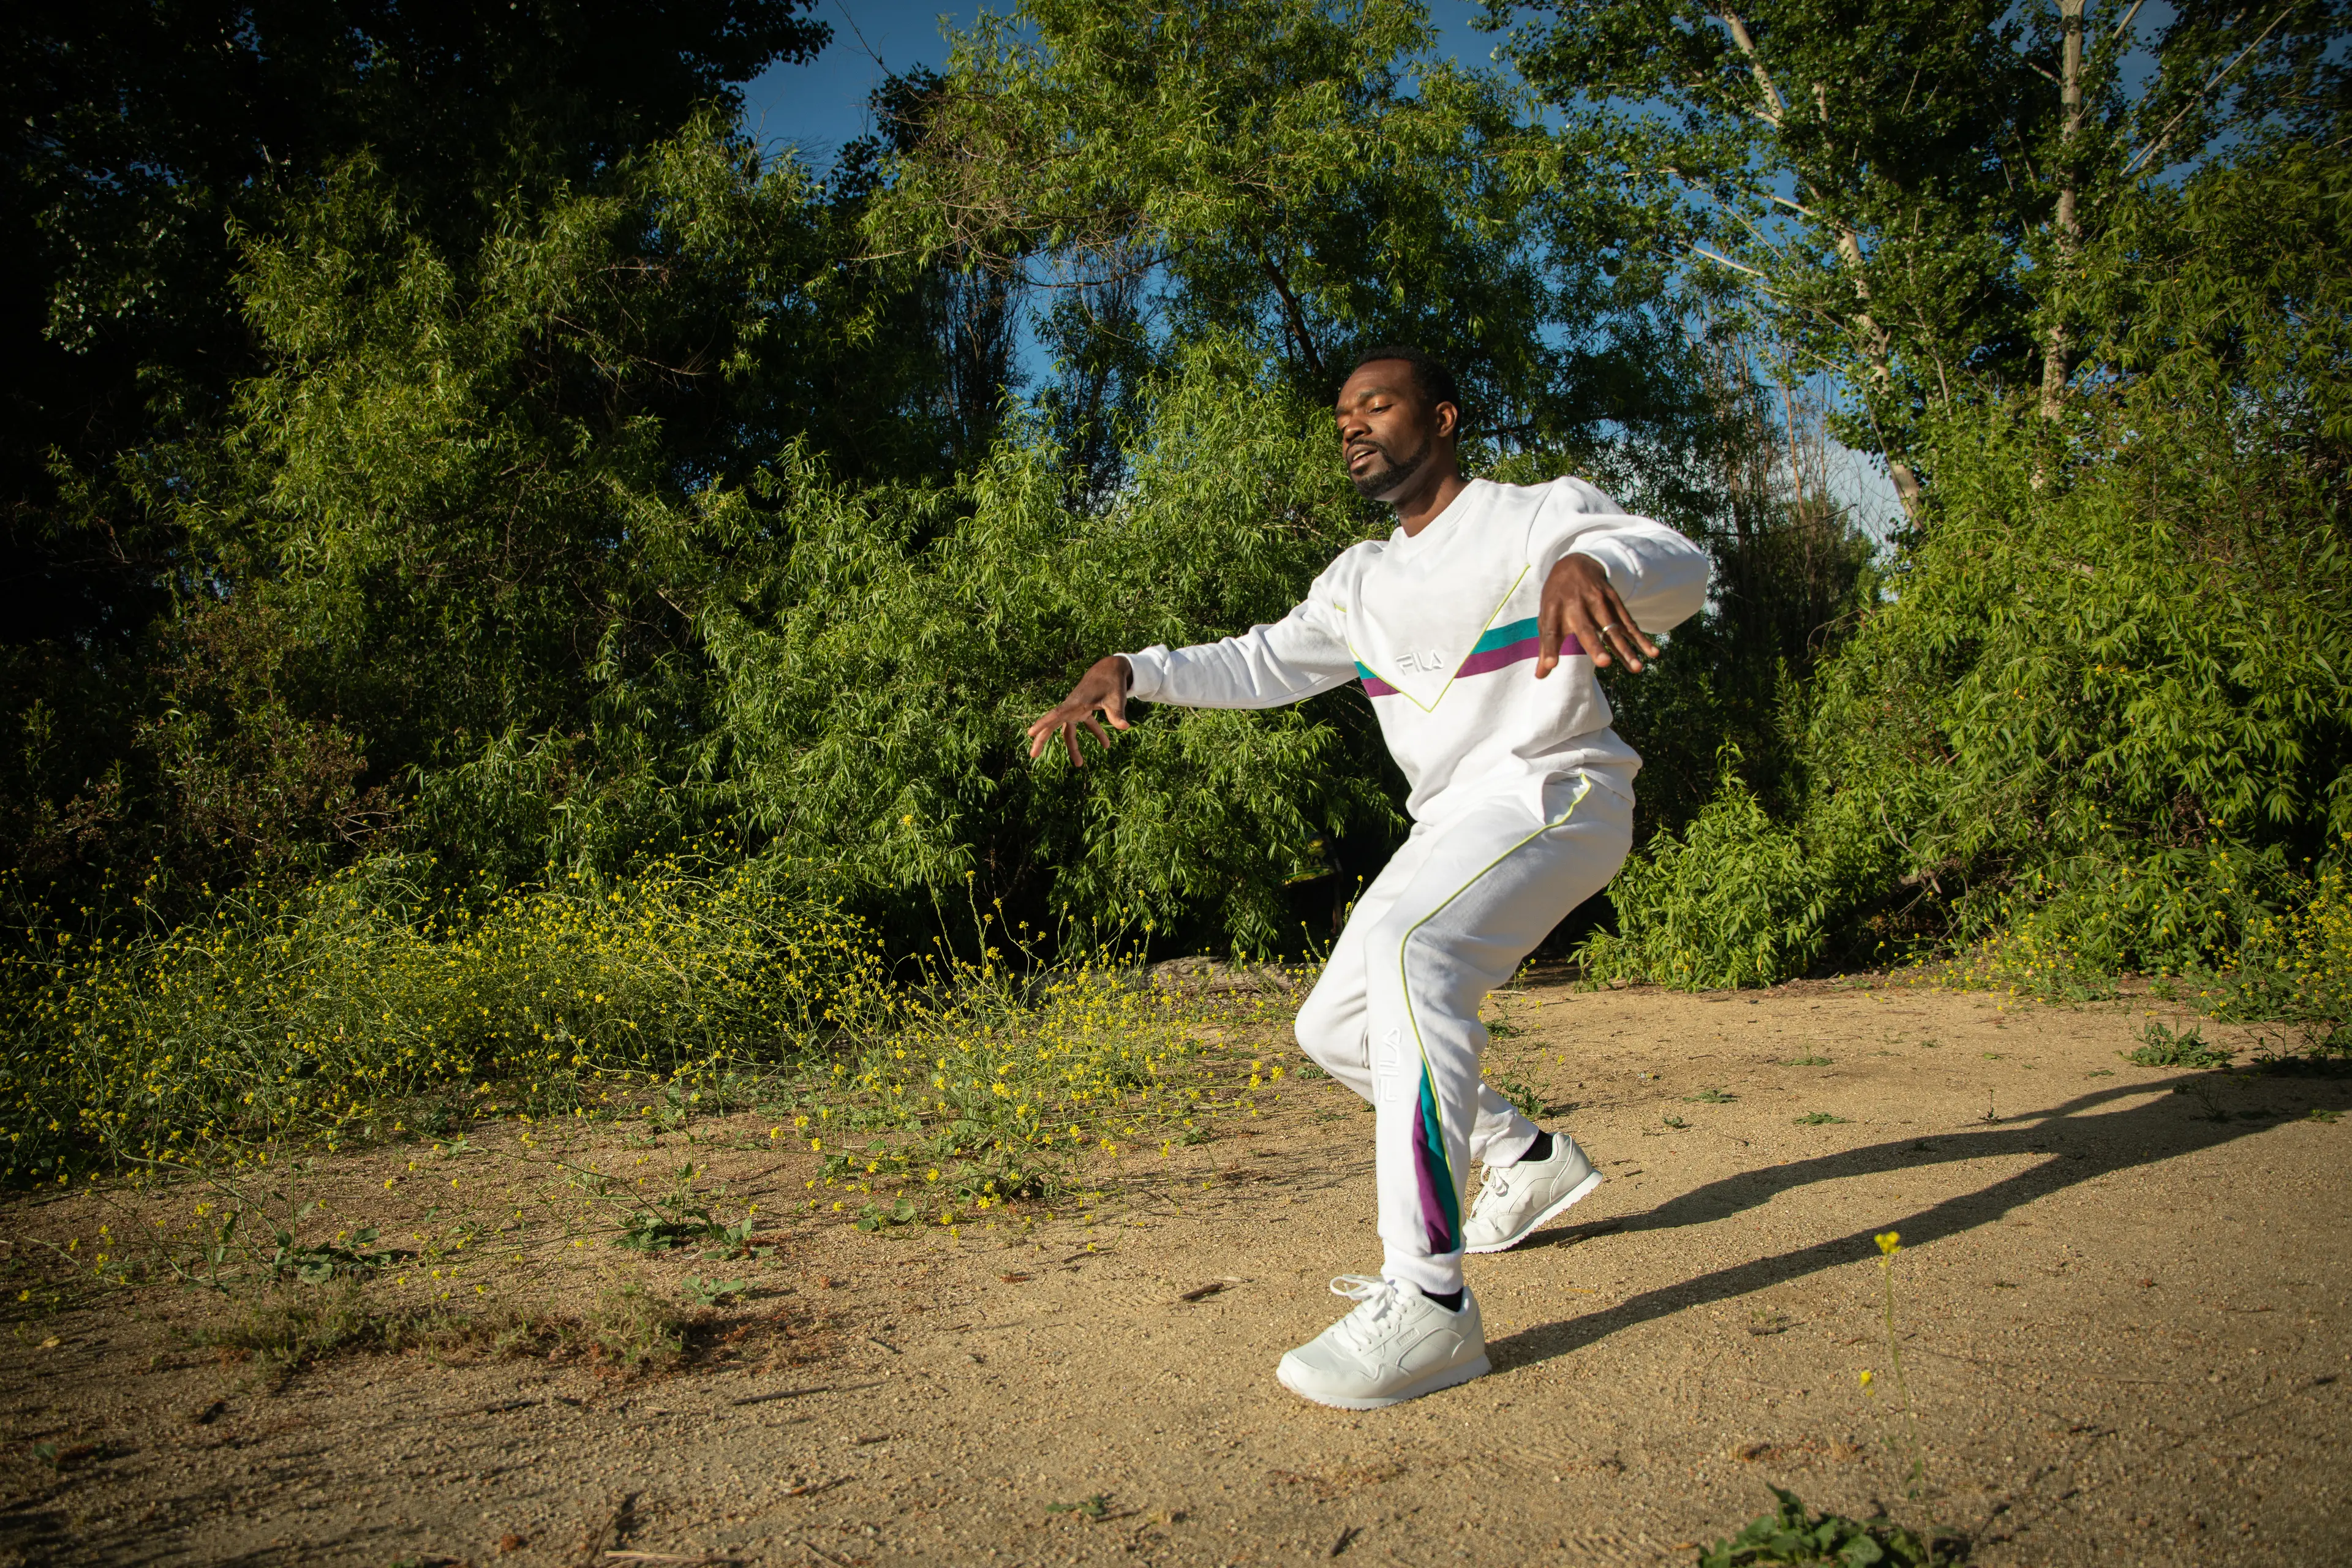 Photo of black man (André) in white attire dancing on a dirt trail with deciduous trees in the background.